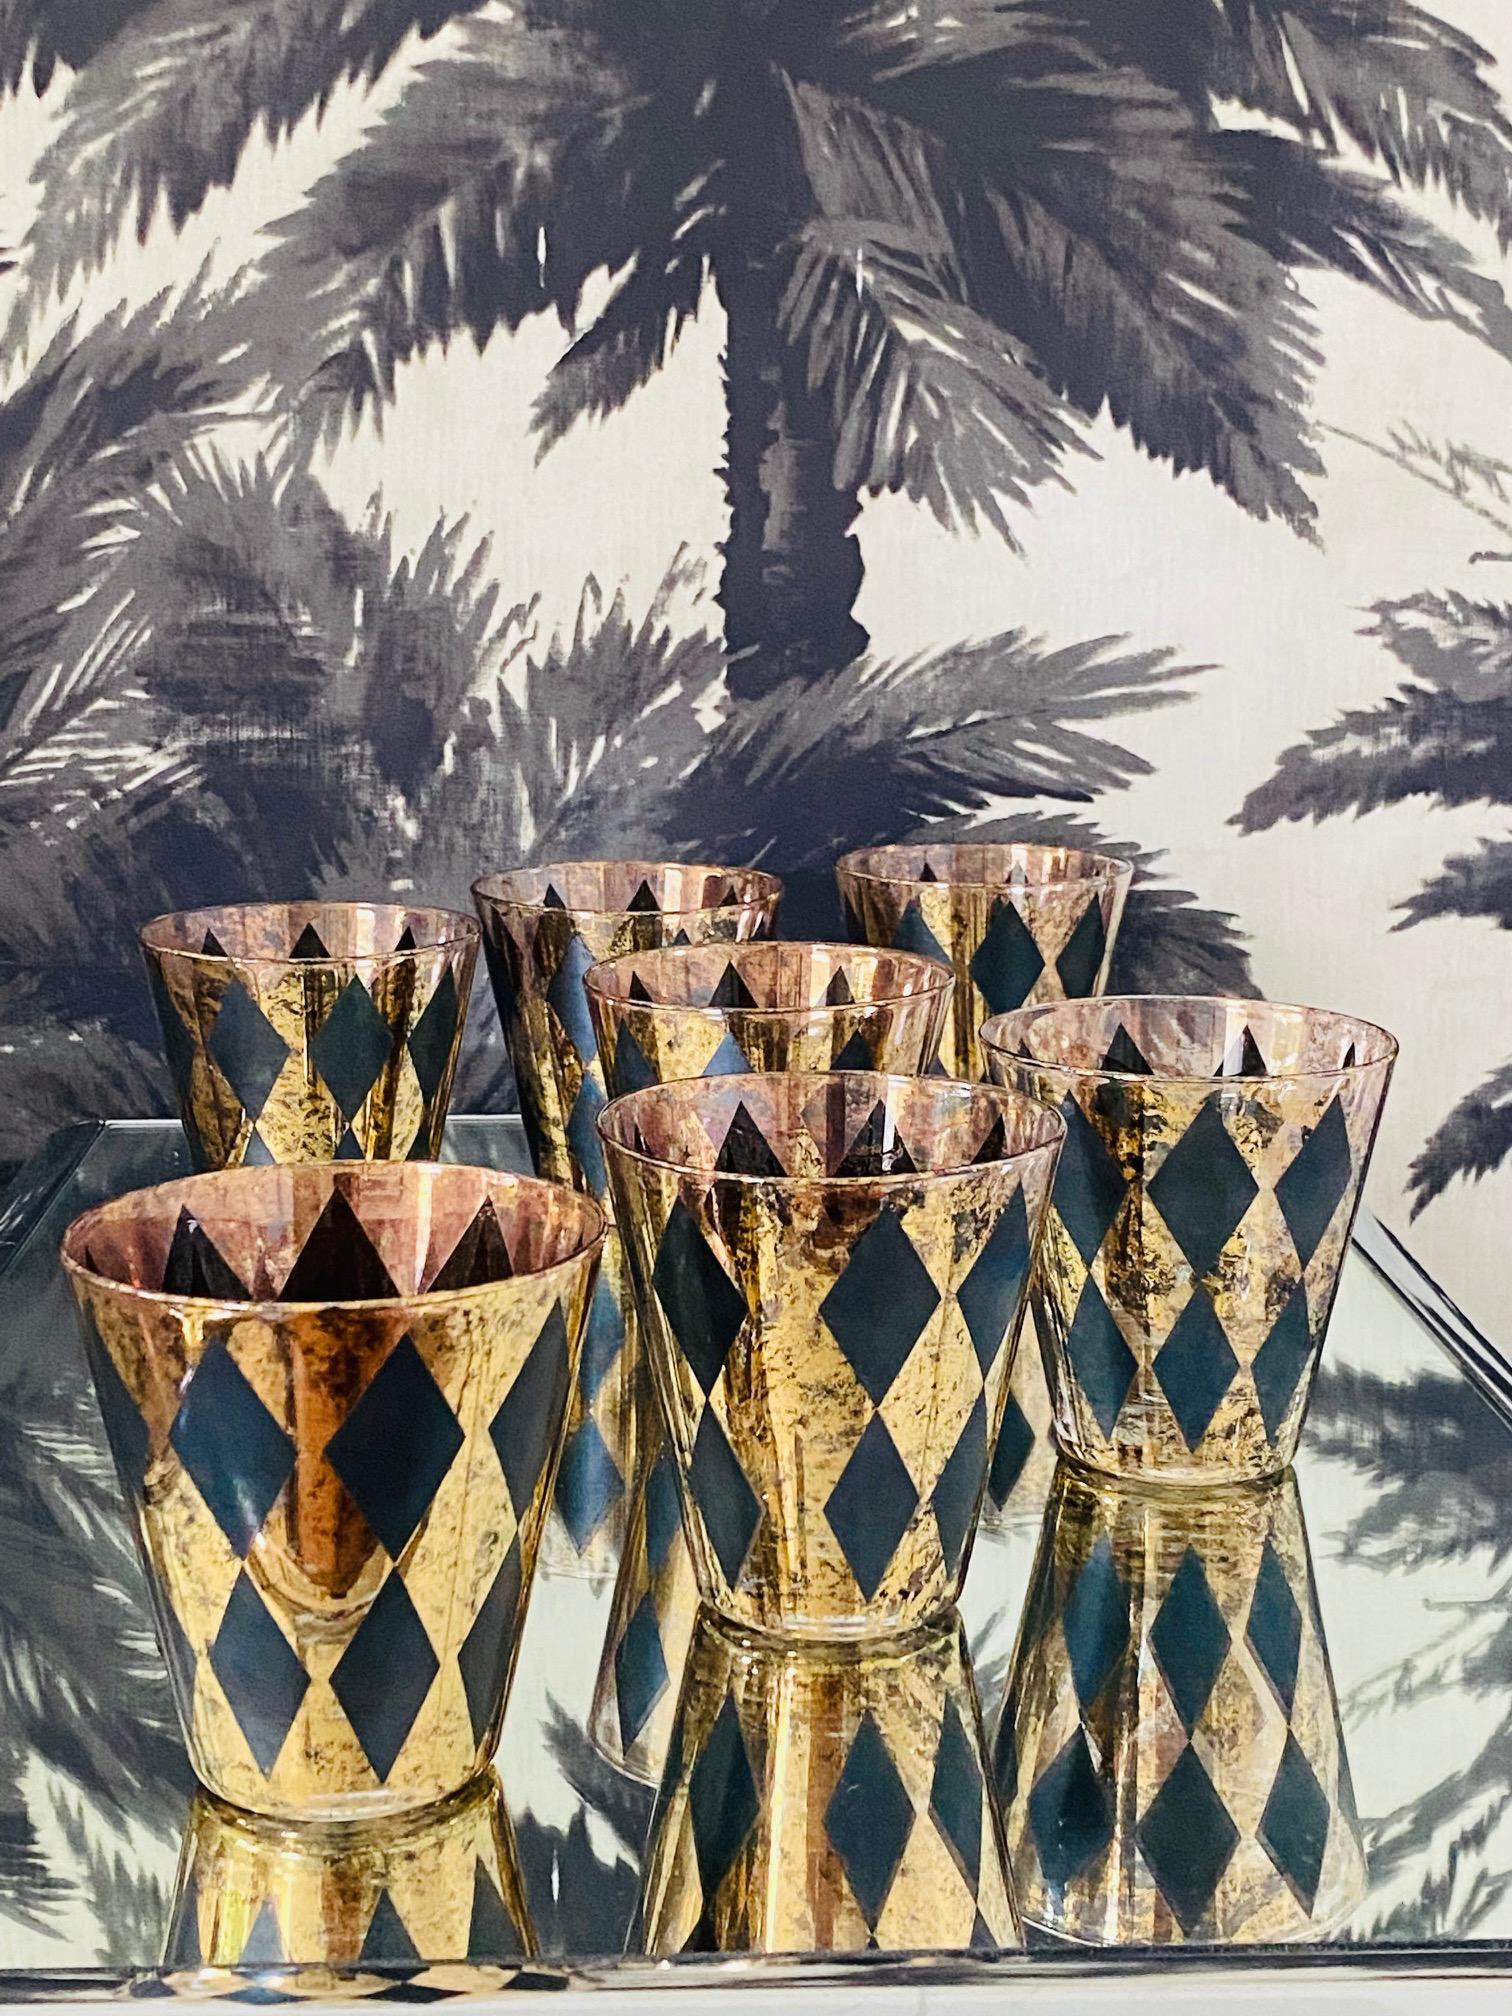 Hand-Crafted Vintage Barware Glasses with Harlequin Design in Black with Gold Leaf, c. 1960's